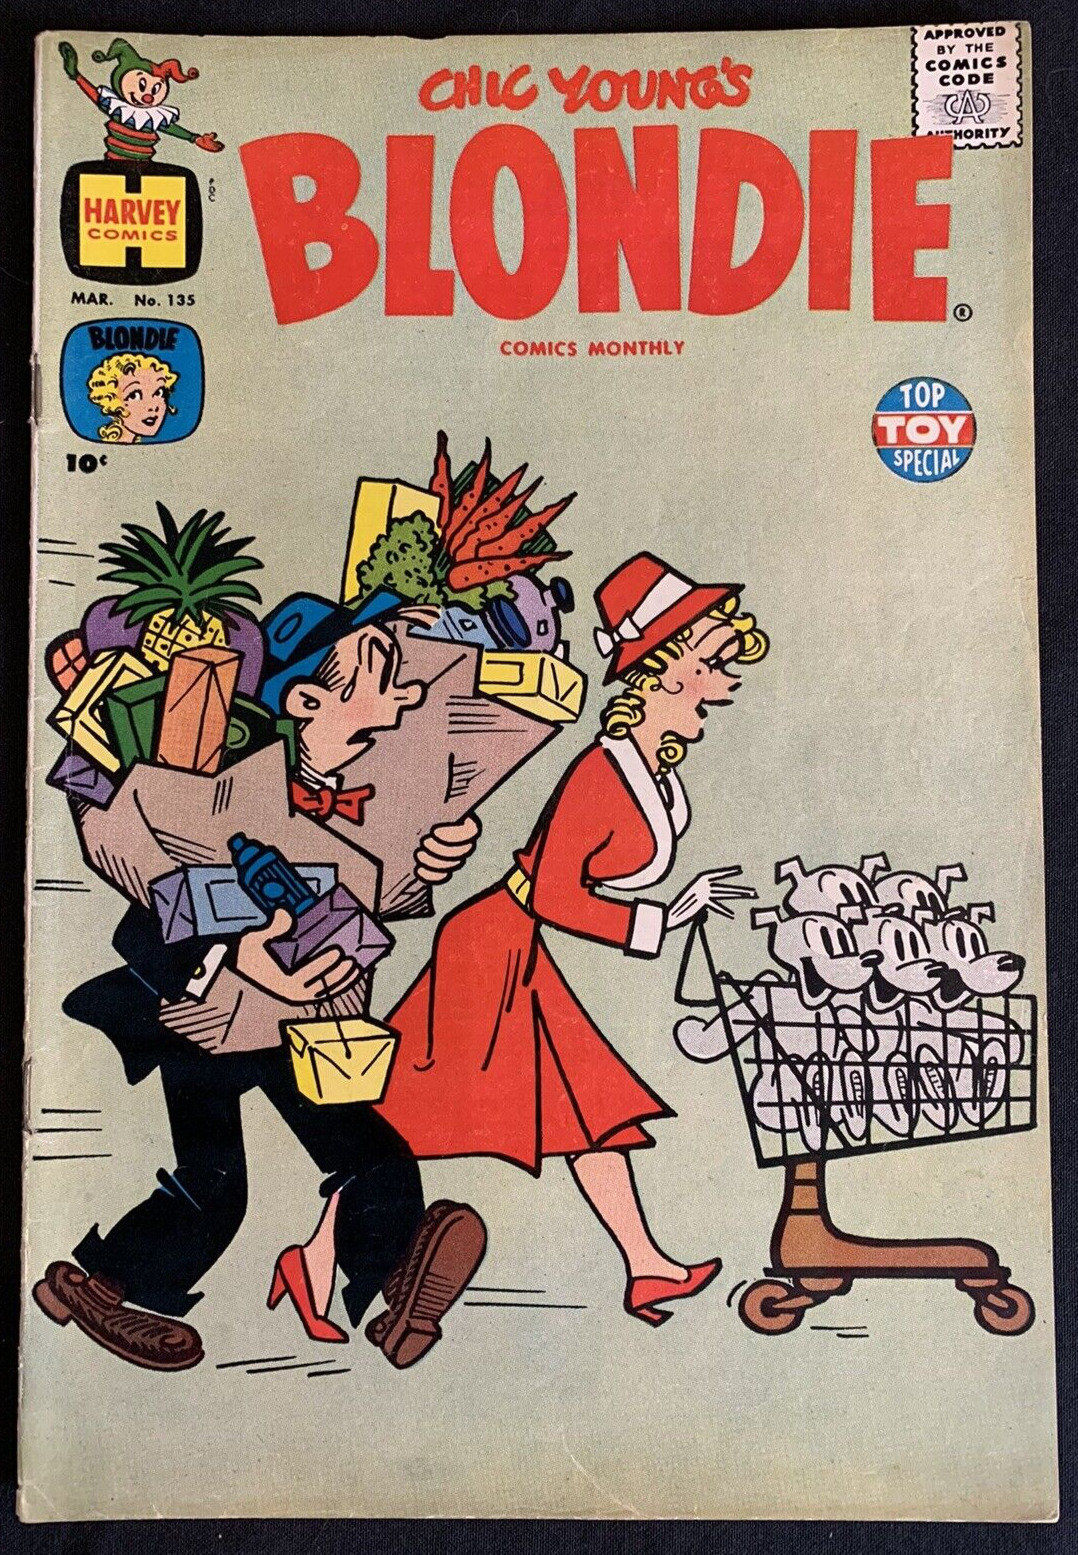 BLONDIE #135 1960 Harvey Comics Chic Young - Top Toy Special Original Owner